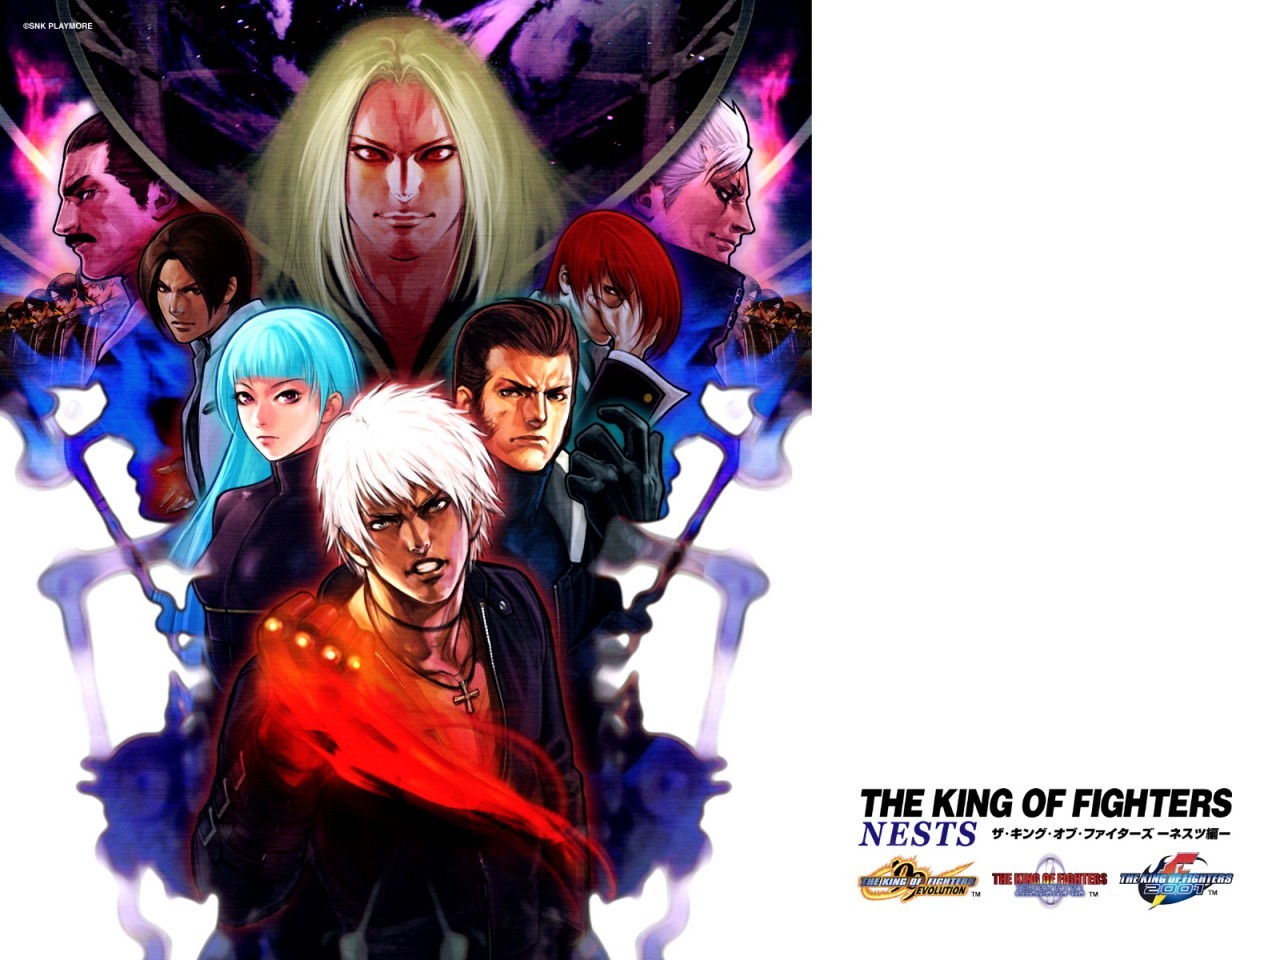 kof nests collection ps2 iso